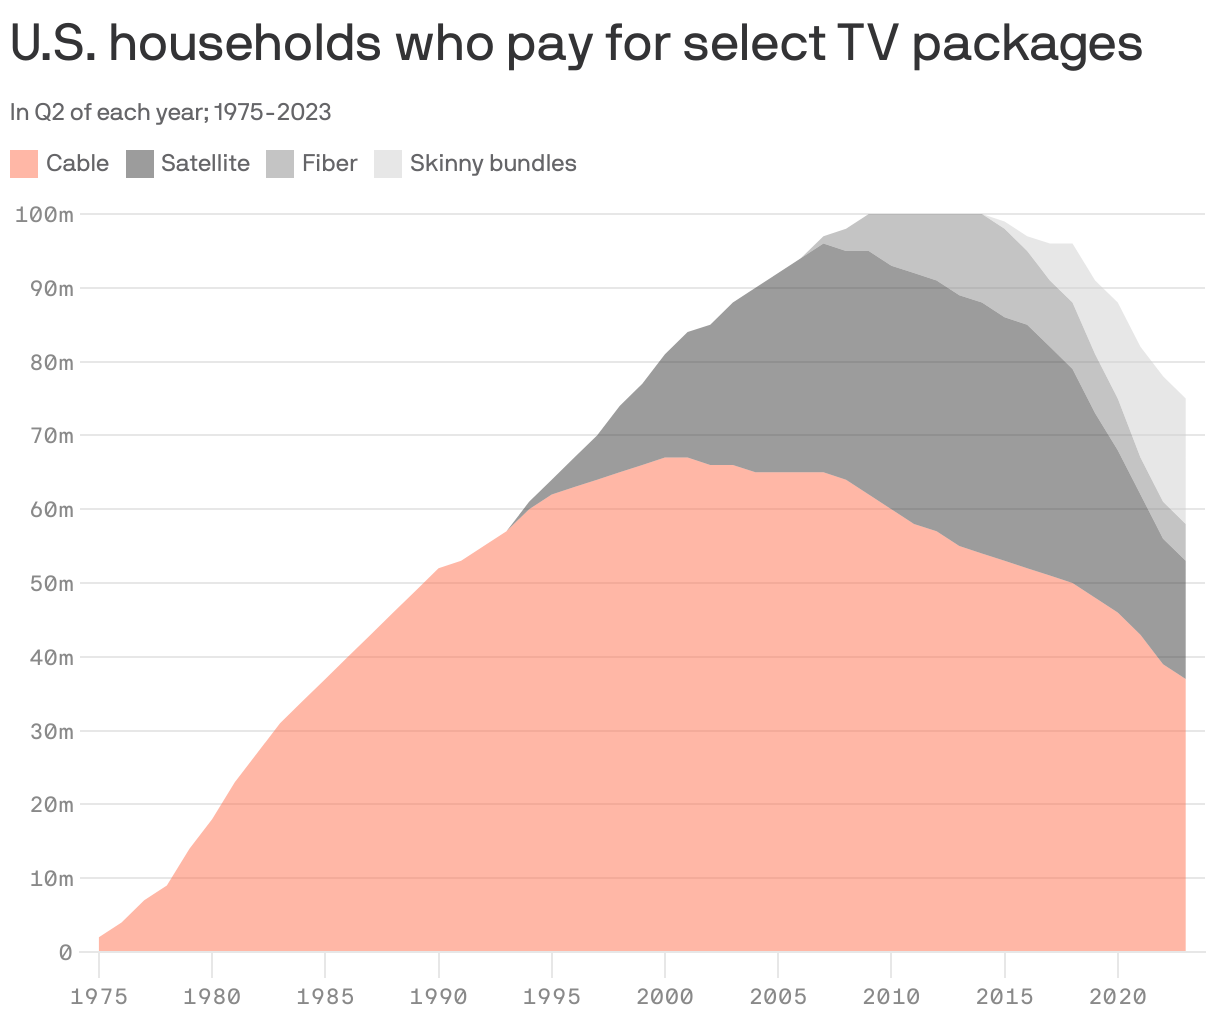 U.S. households who pay for select TV packages